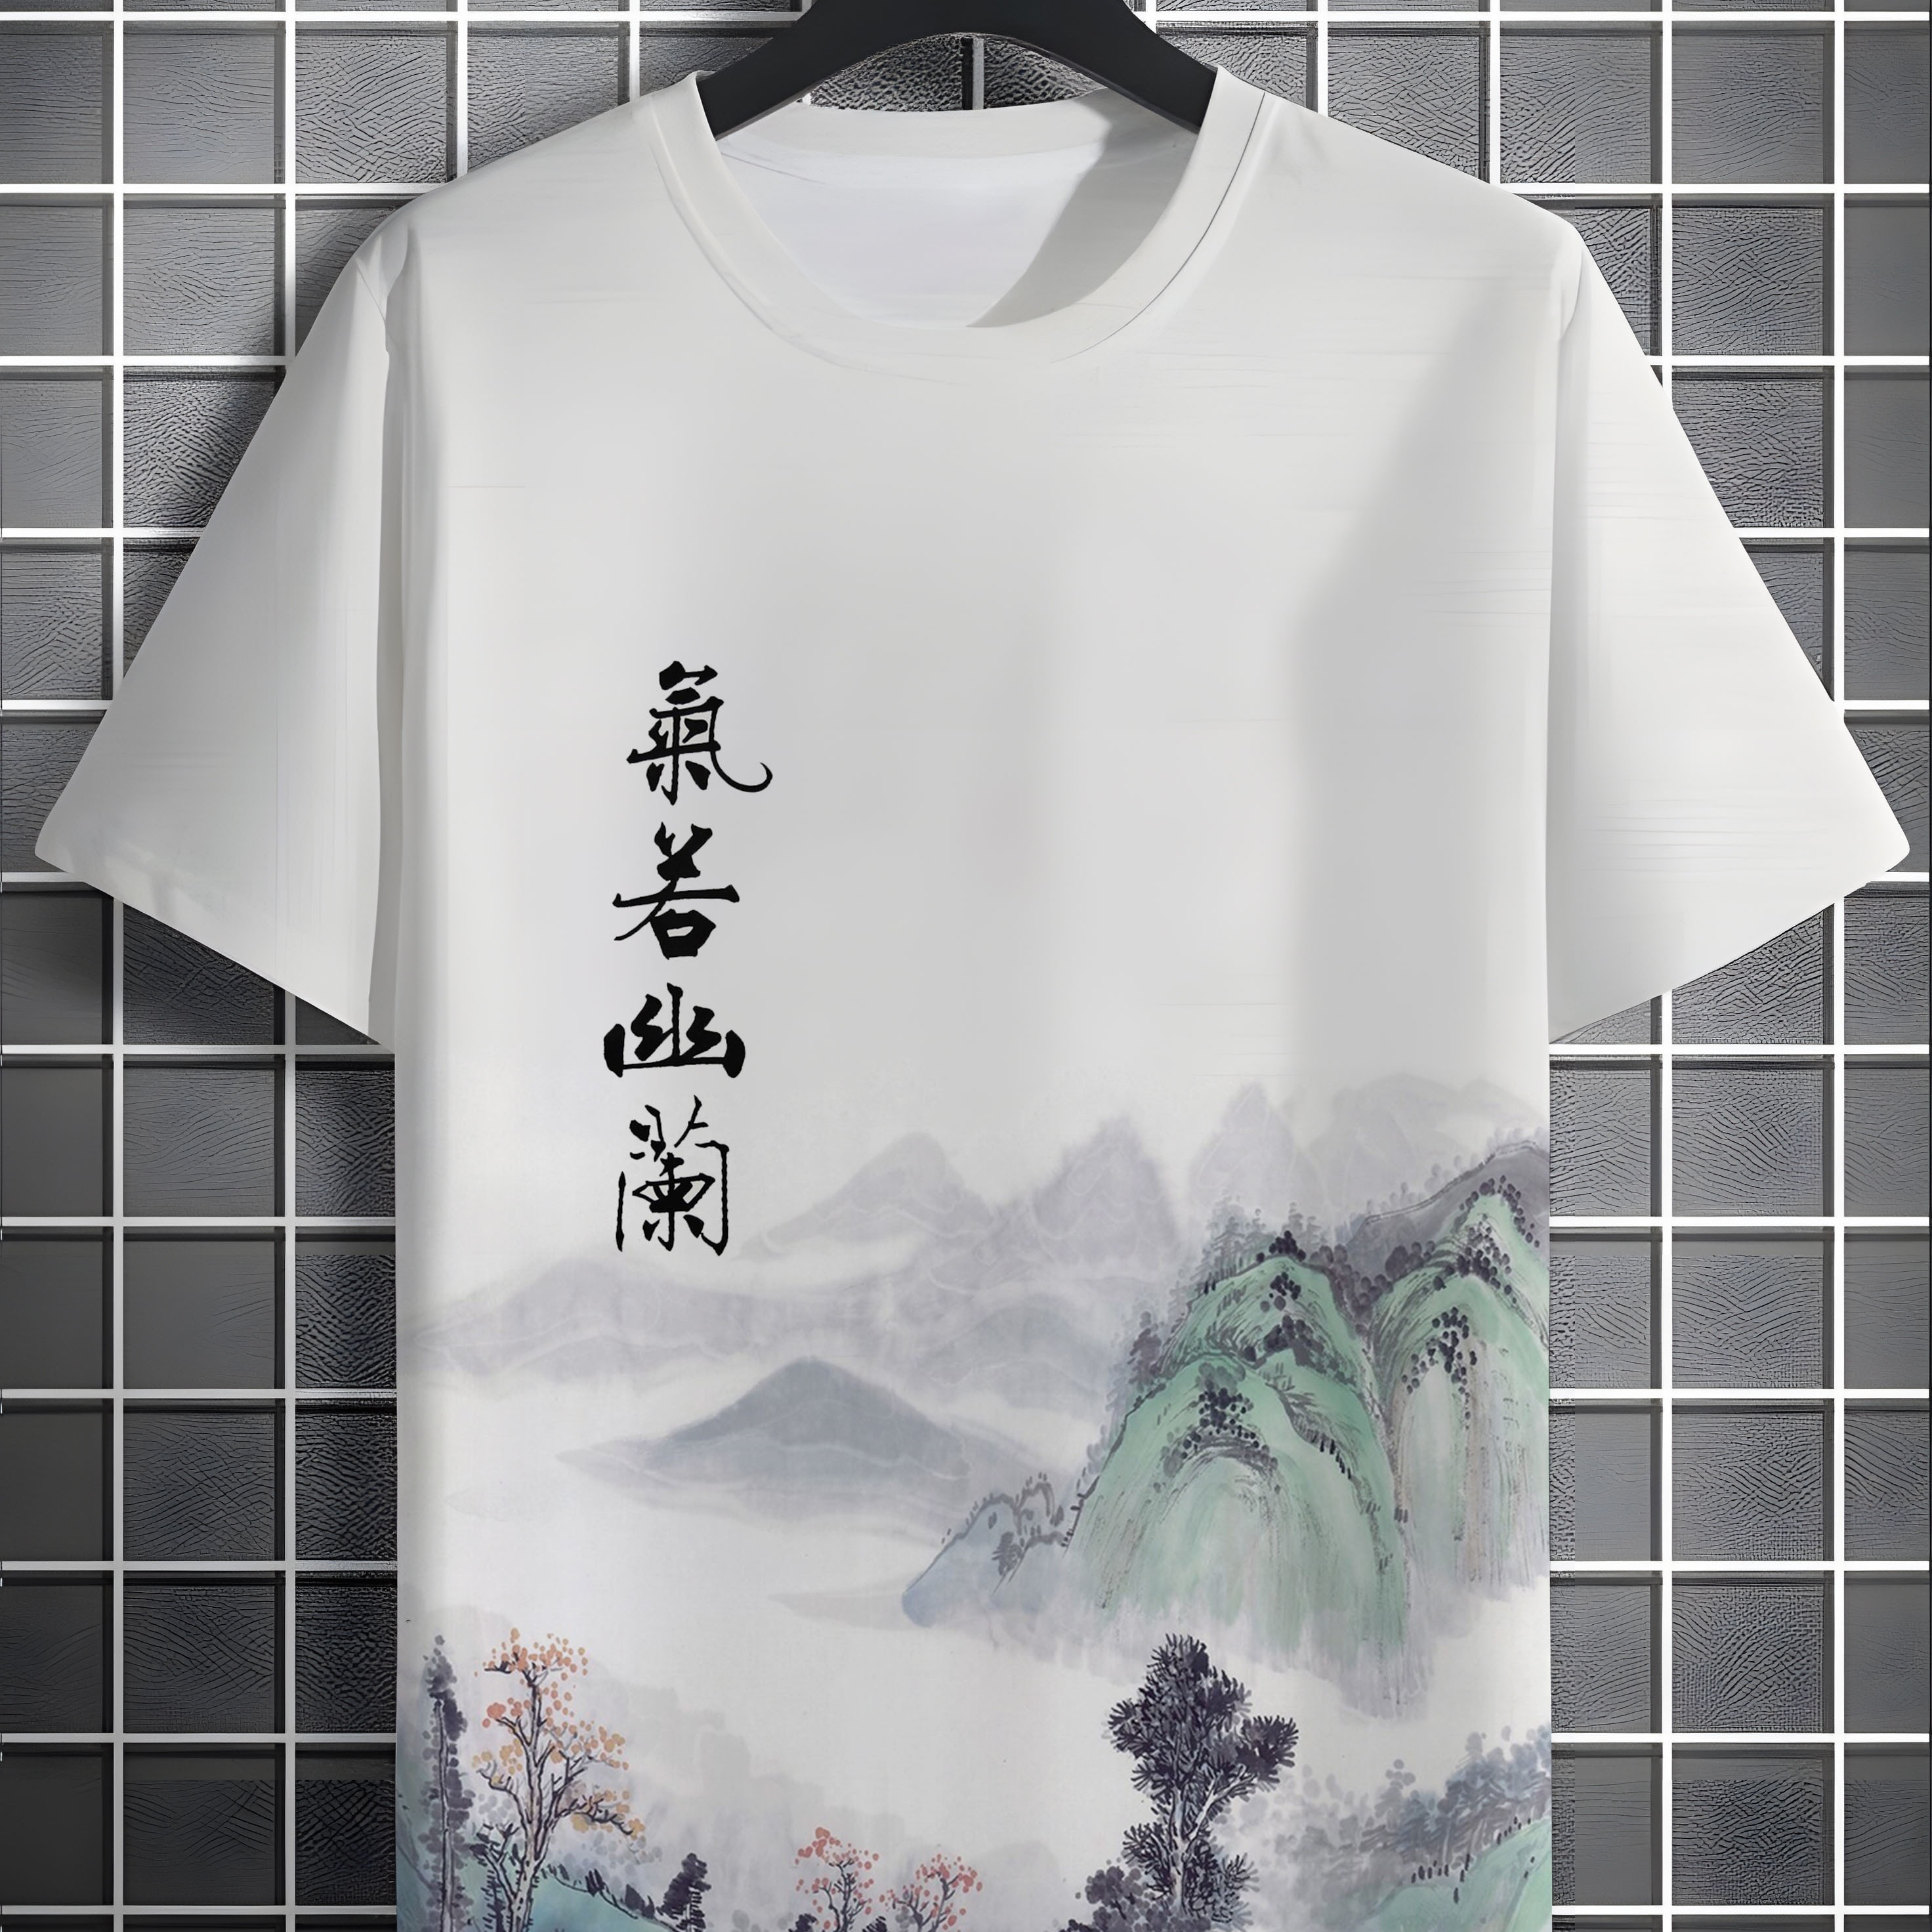 

Men's Casual And Stylish Ink And Wash Painting Style Pattern And Chinese Character Print T-shirt, Crew Neck And Short Sleeve Tops For Summer Street Wear